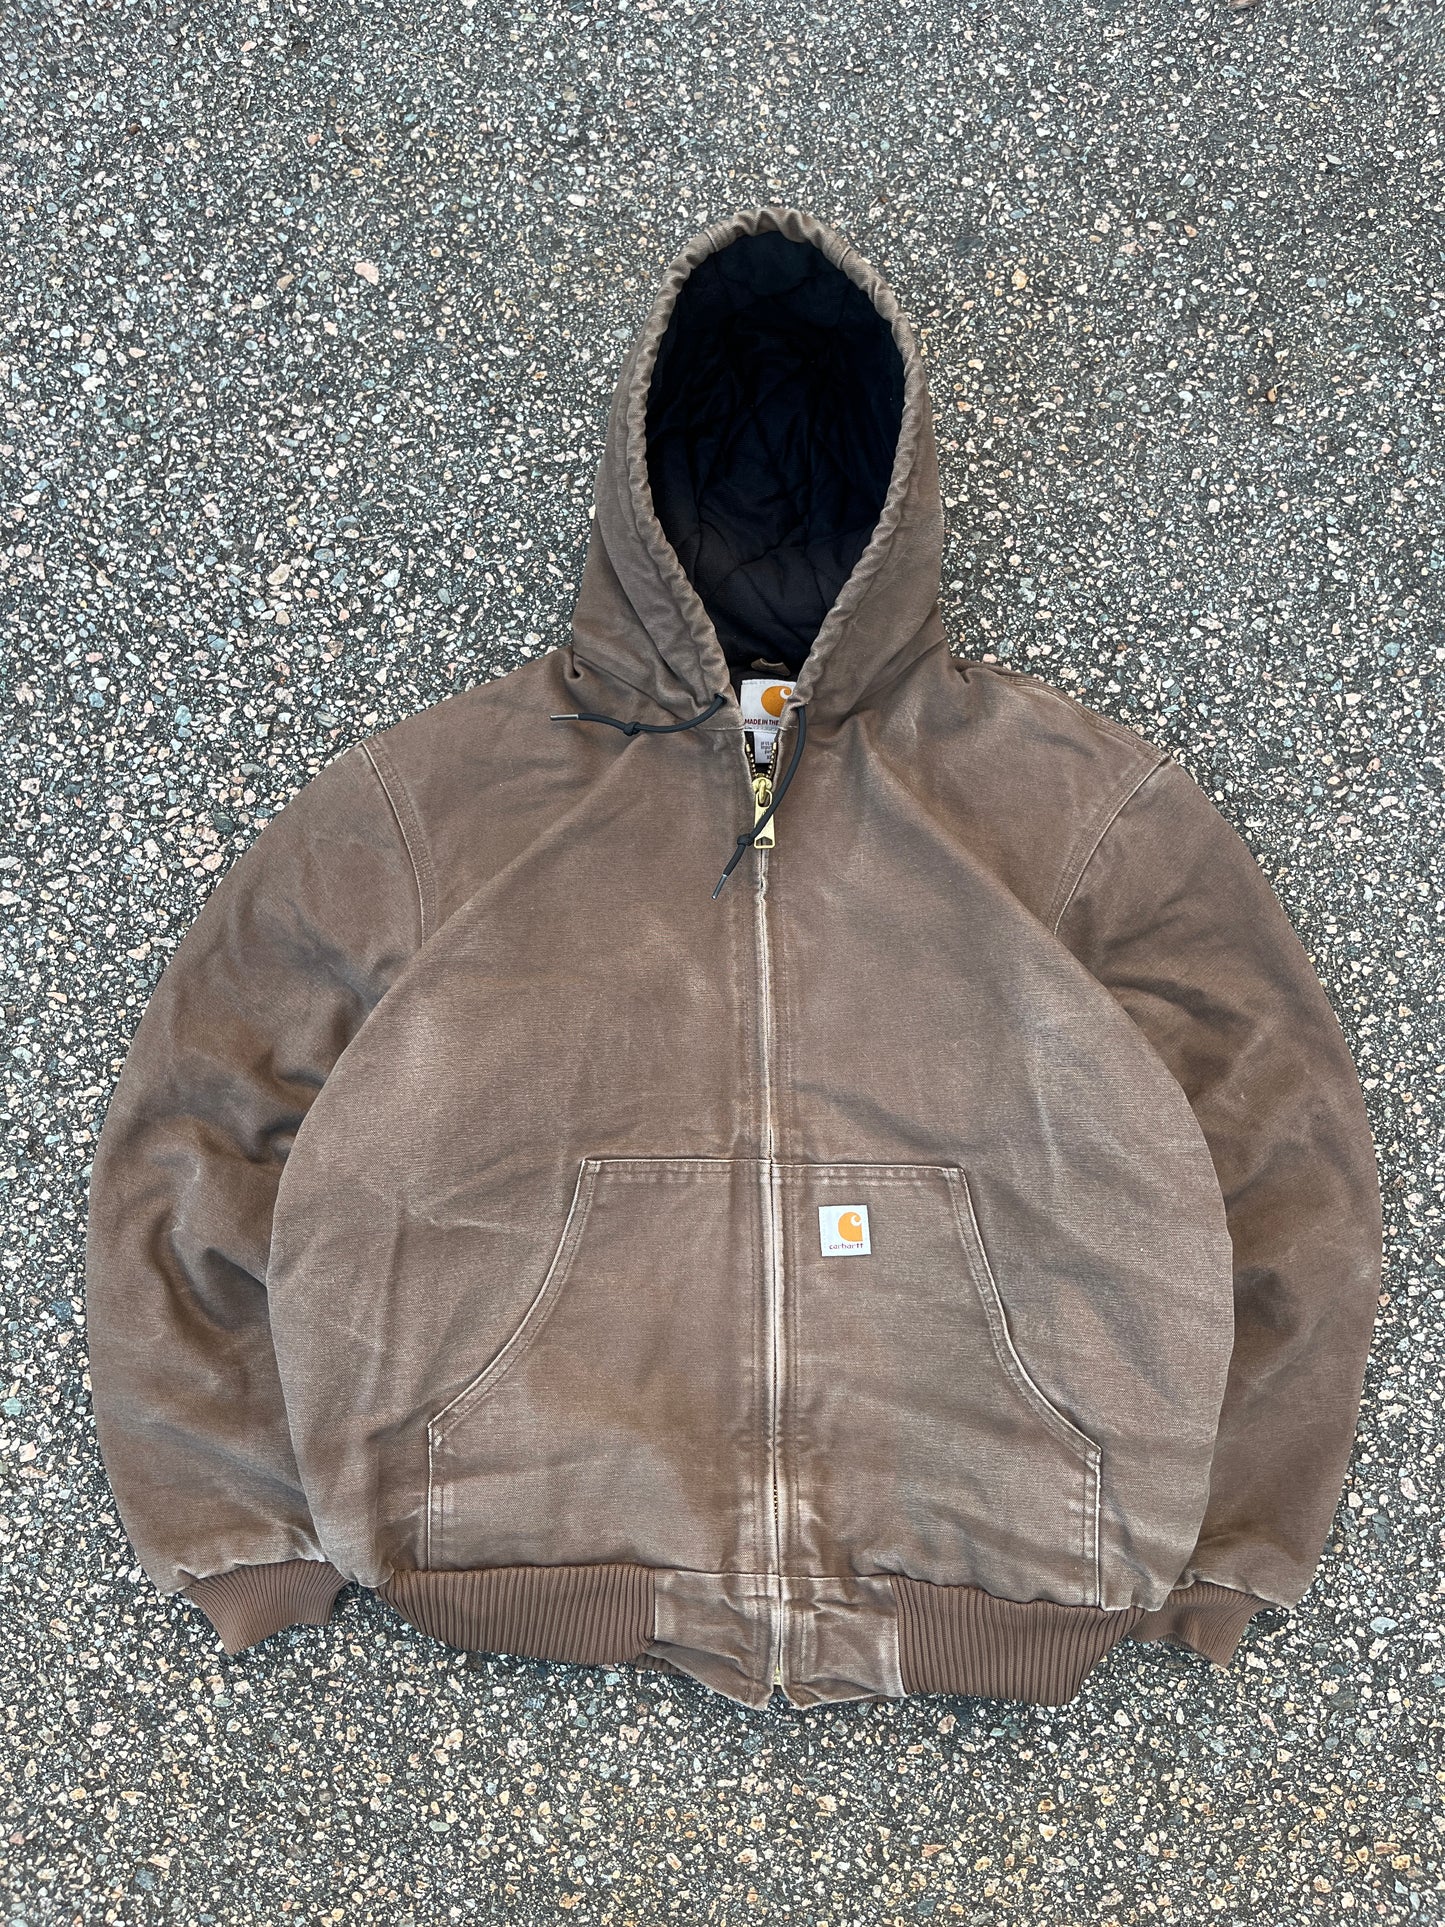 Faded Brown Carhartt Active Jacket - Boxy L-XL